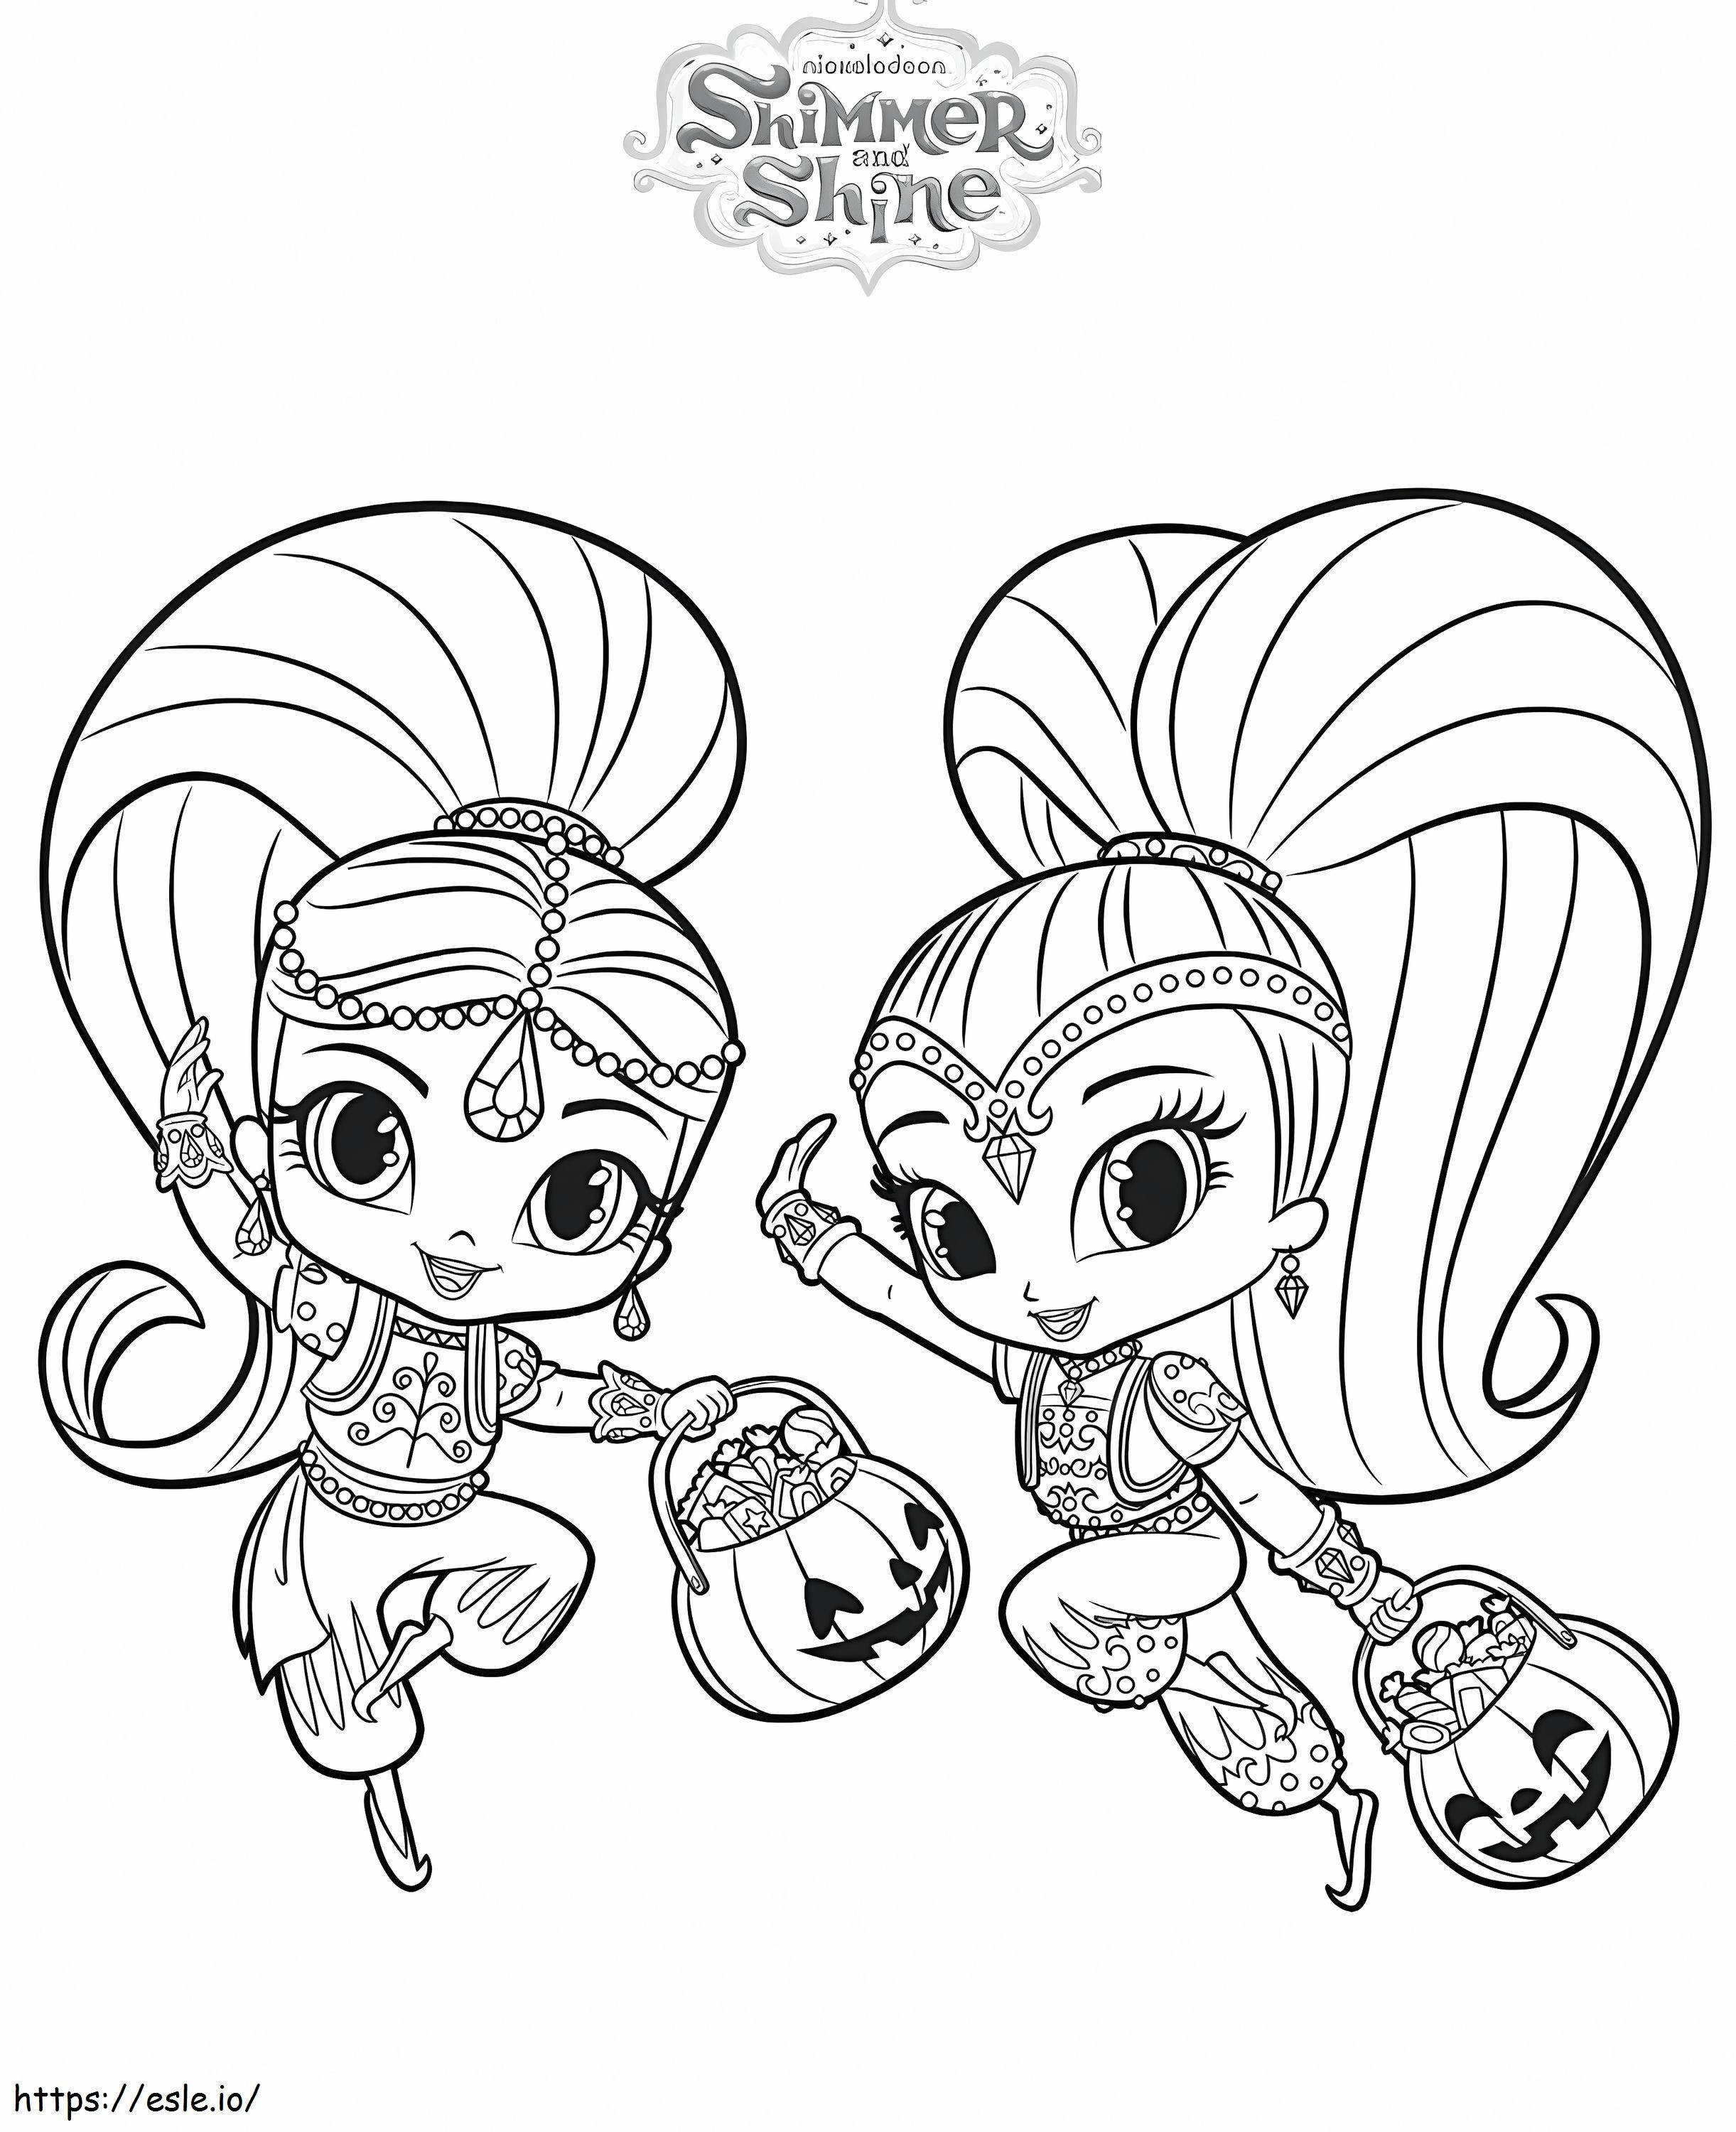 1571706246_Shimmer And Shine Go Trick Treating E1516281920325 834X1024 1 coloring page